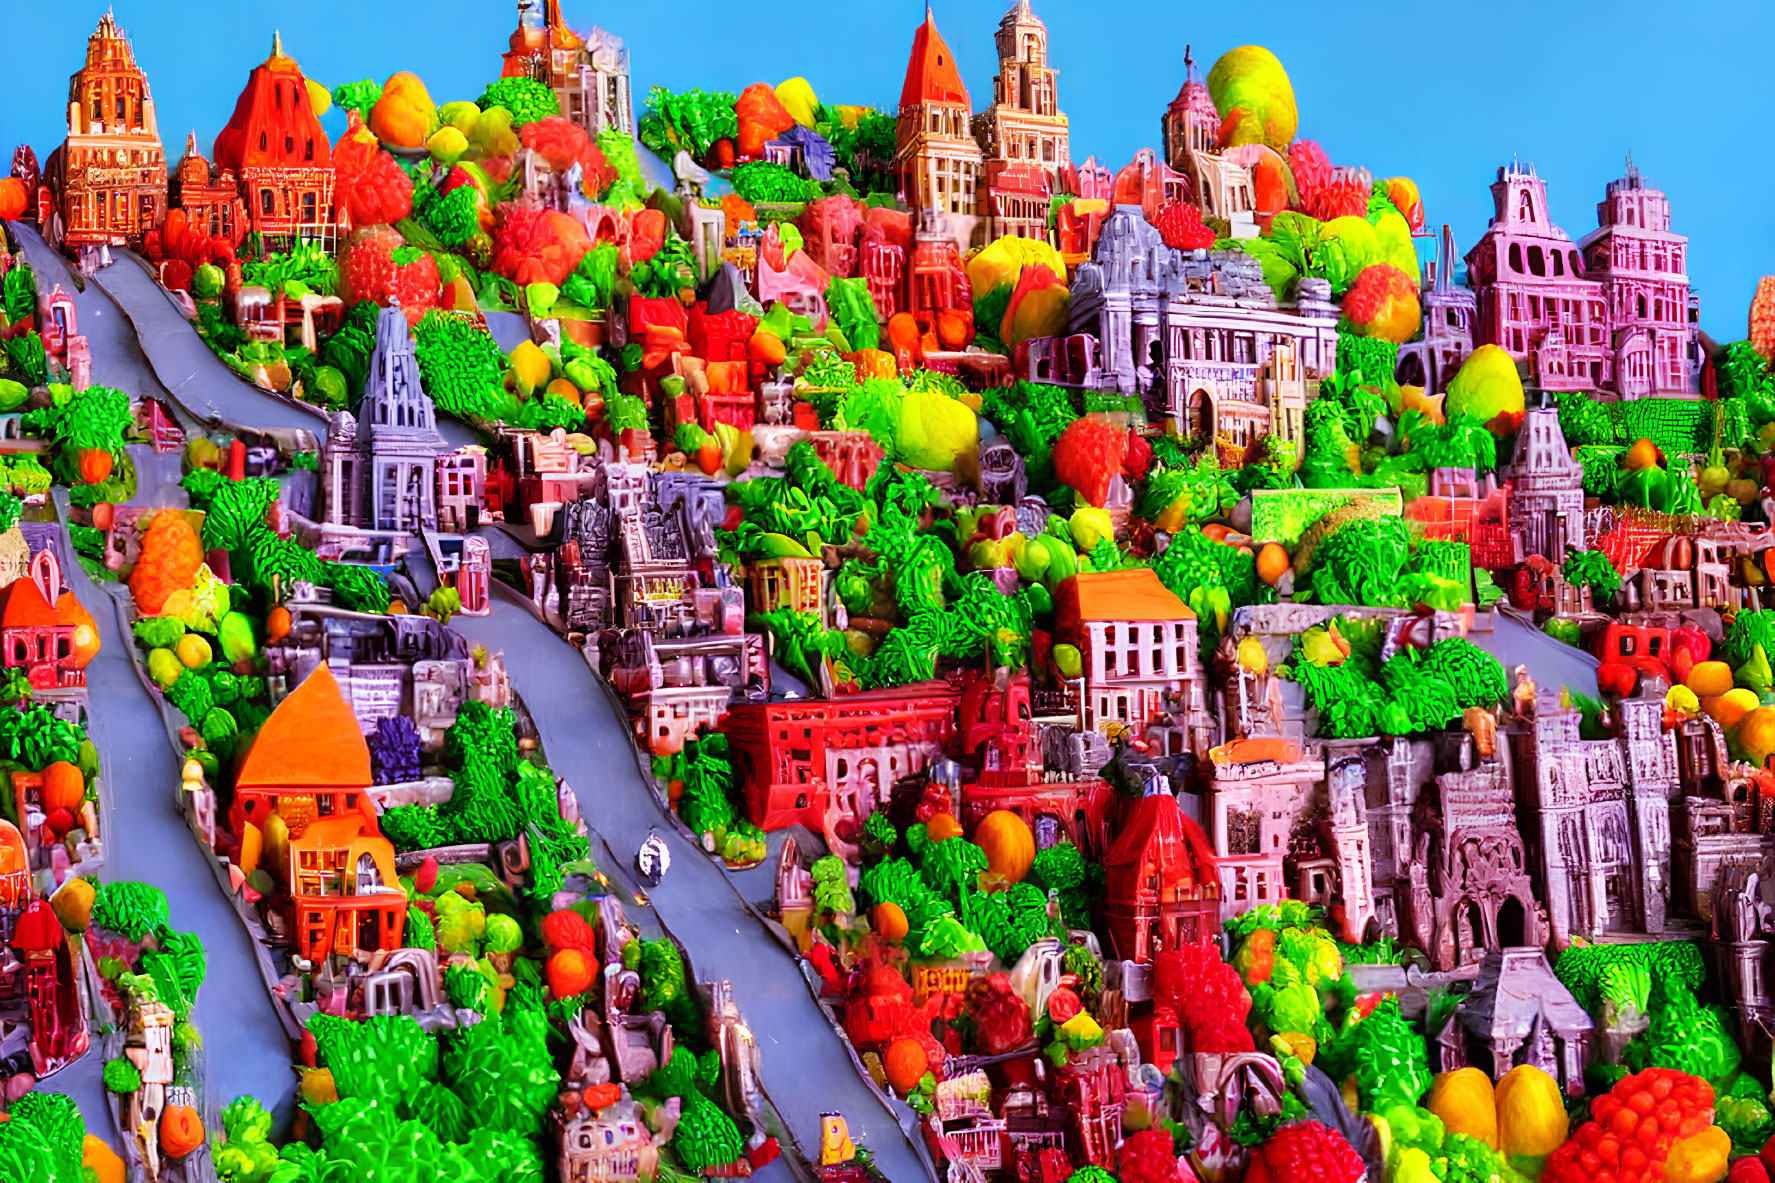 Colorful miniature landscape of whimsical city with diverse architecture and lush greenery